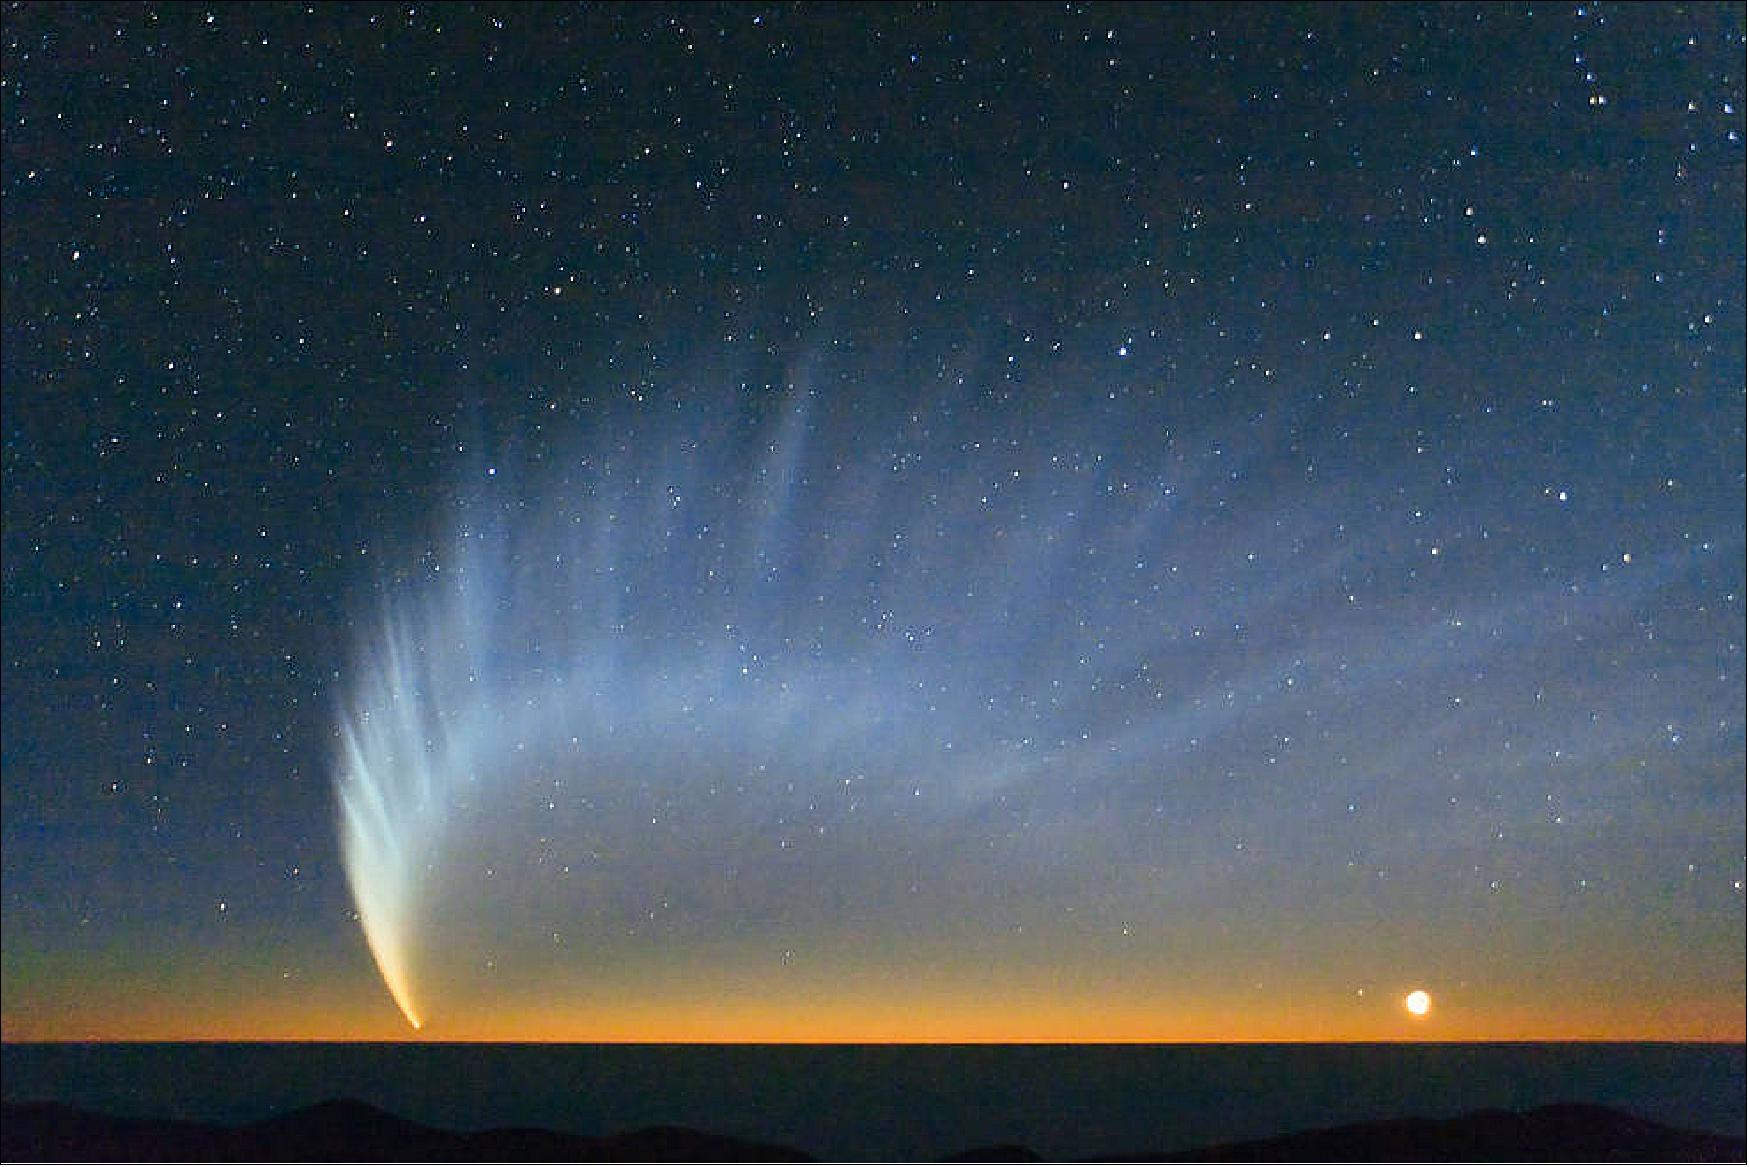 Figure 19: Comet McNaught over the Pacific Ocean. Image taken from Paranal Observatory in January 2007 (image credit: ESO/Sebastian Deiries)